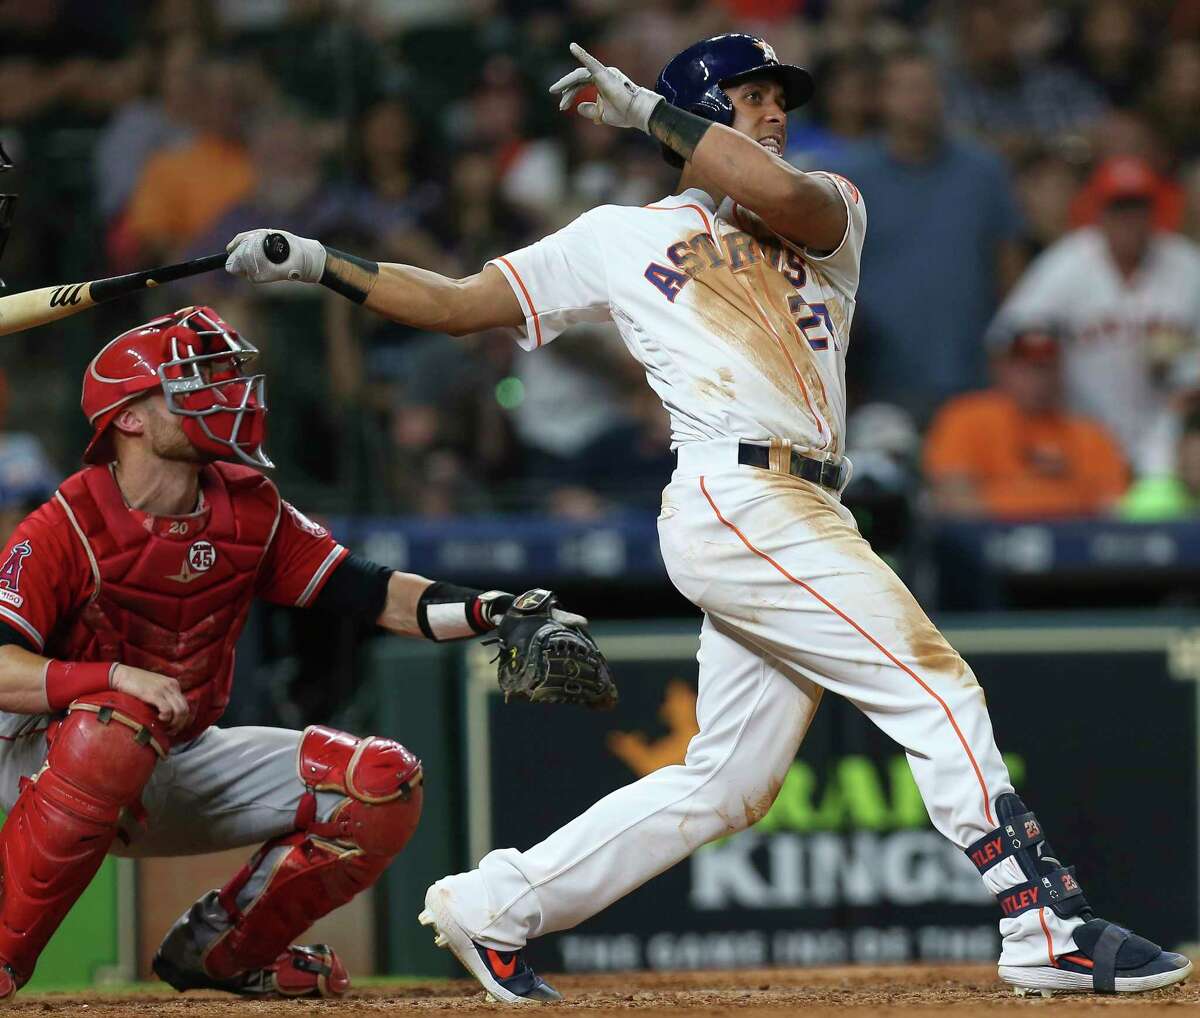 Michael Brantley swings into action in the sixth inning, drilling a double to right field. He had four of the Astros’ six hits in Friday’ night’s loss to the Angels at Minute Maid Park.